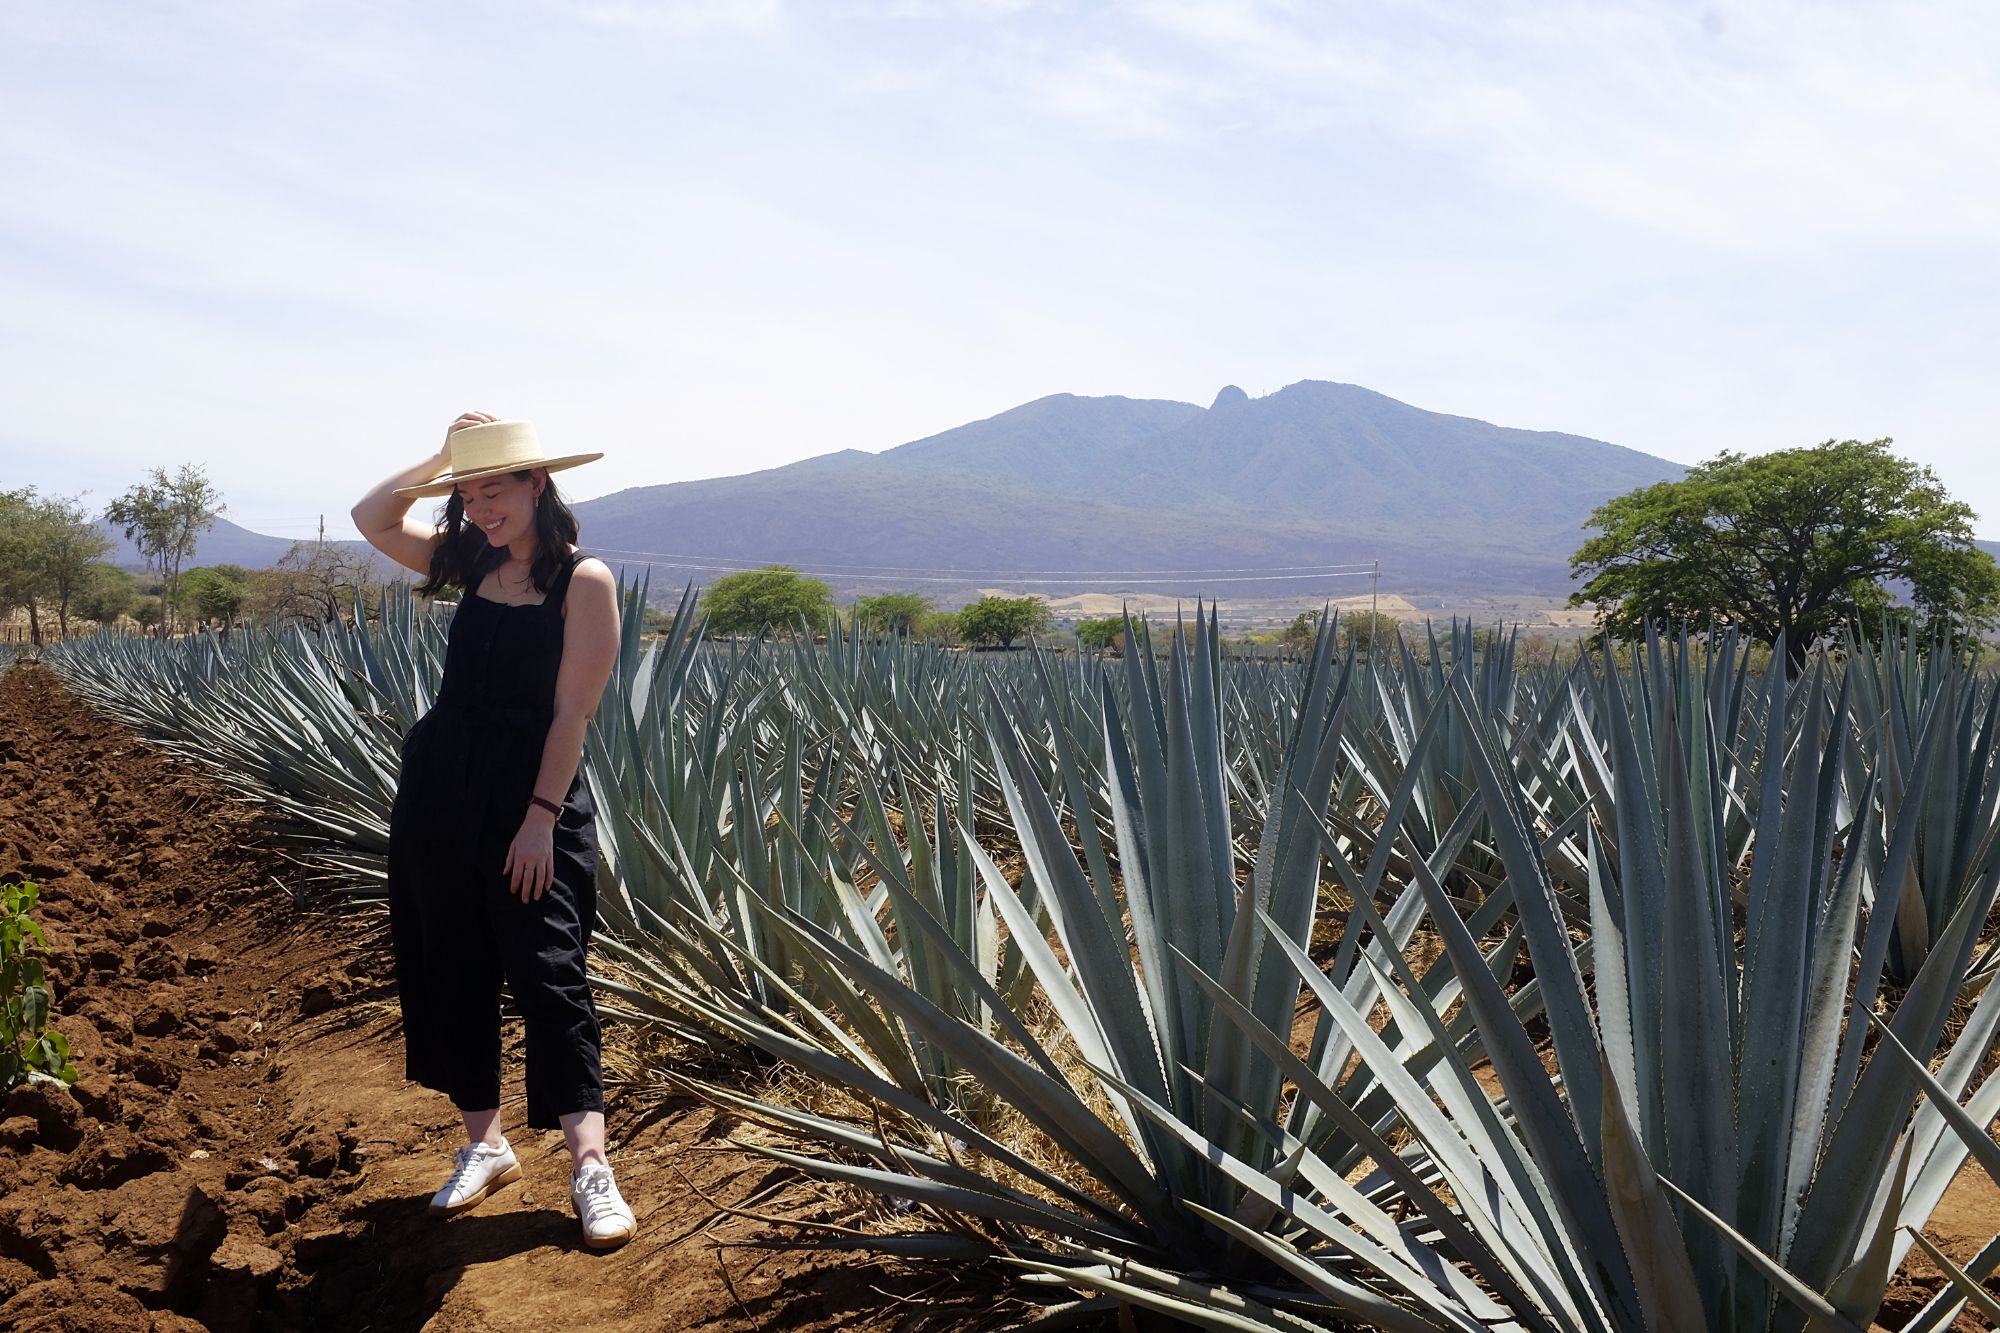 Alyssa stands in an agave field